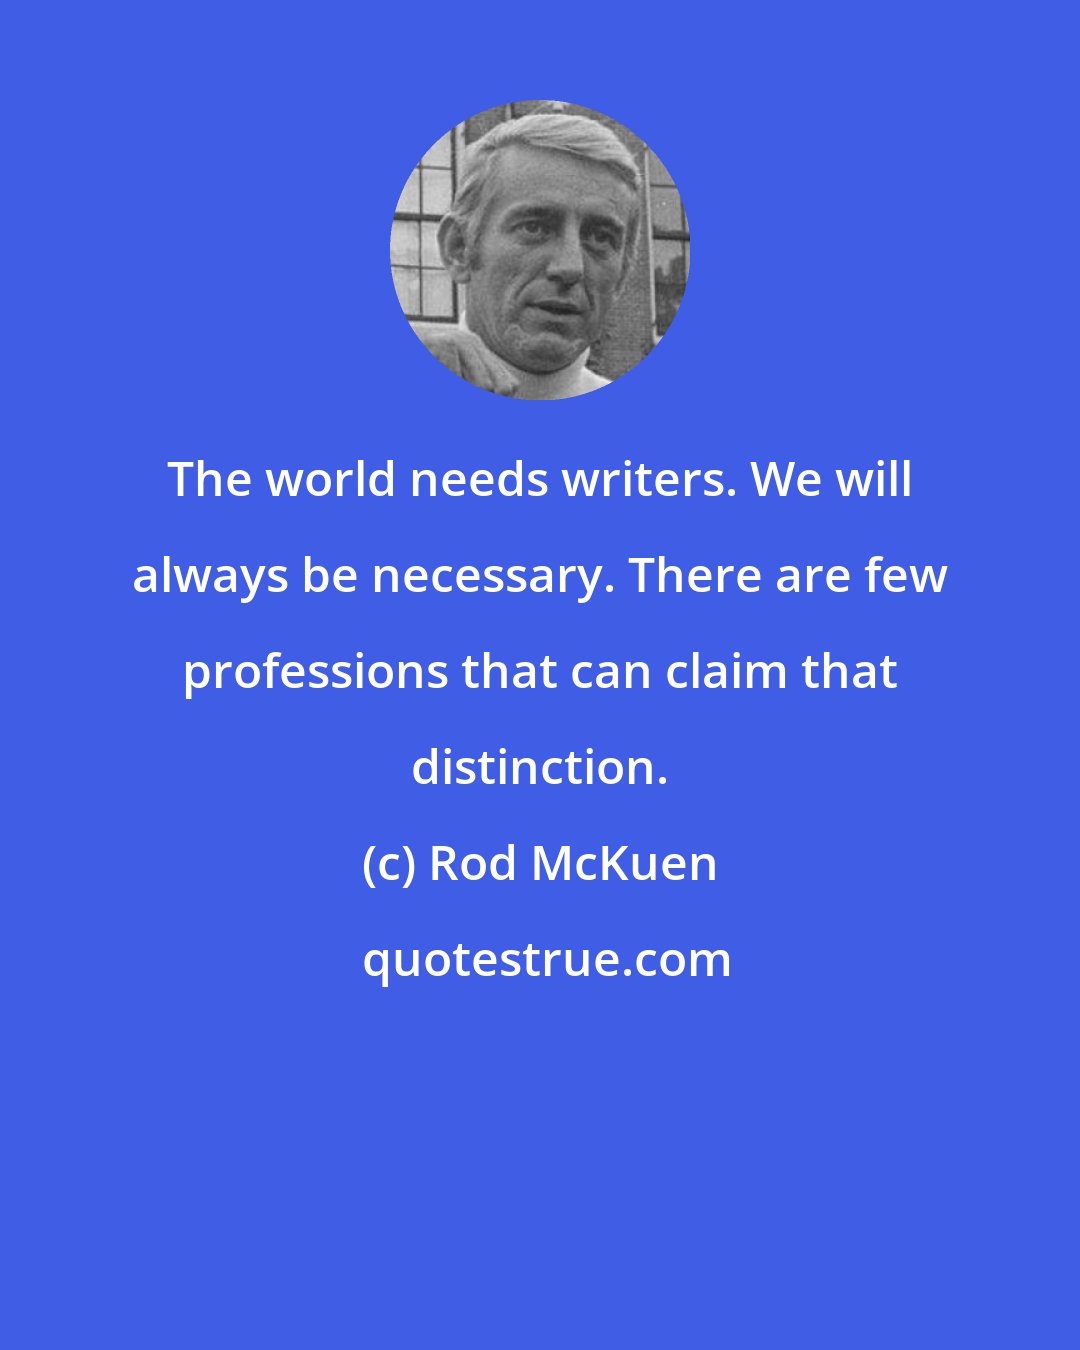 Rod McKuen: The world needs writers. We will always be necessary. There are few professions that can claim that distinction.